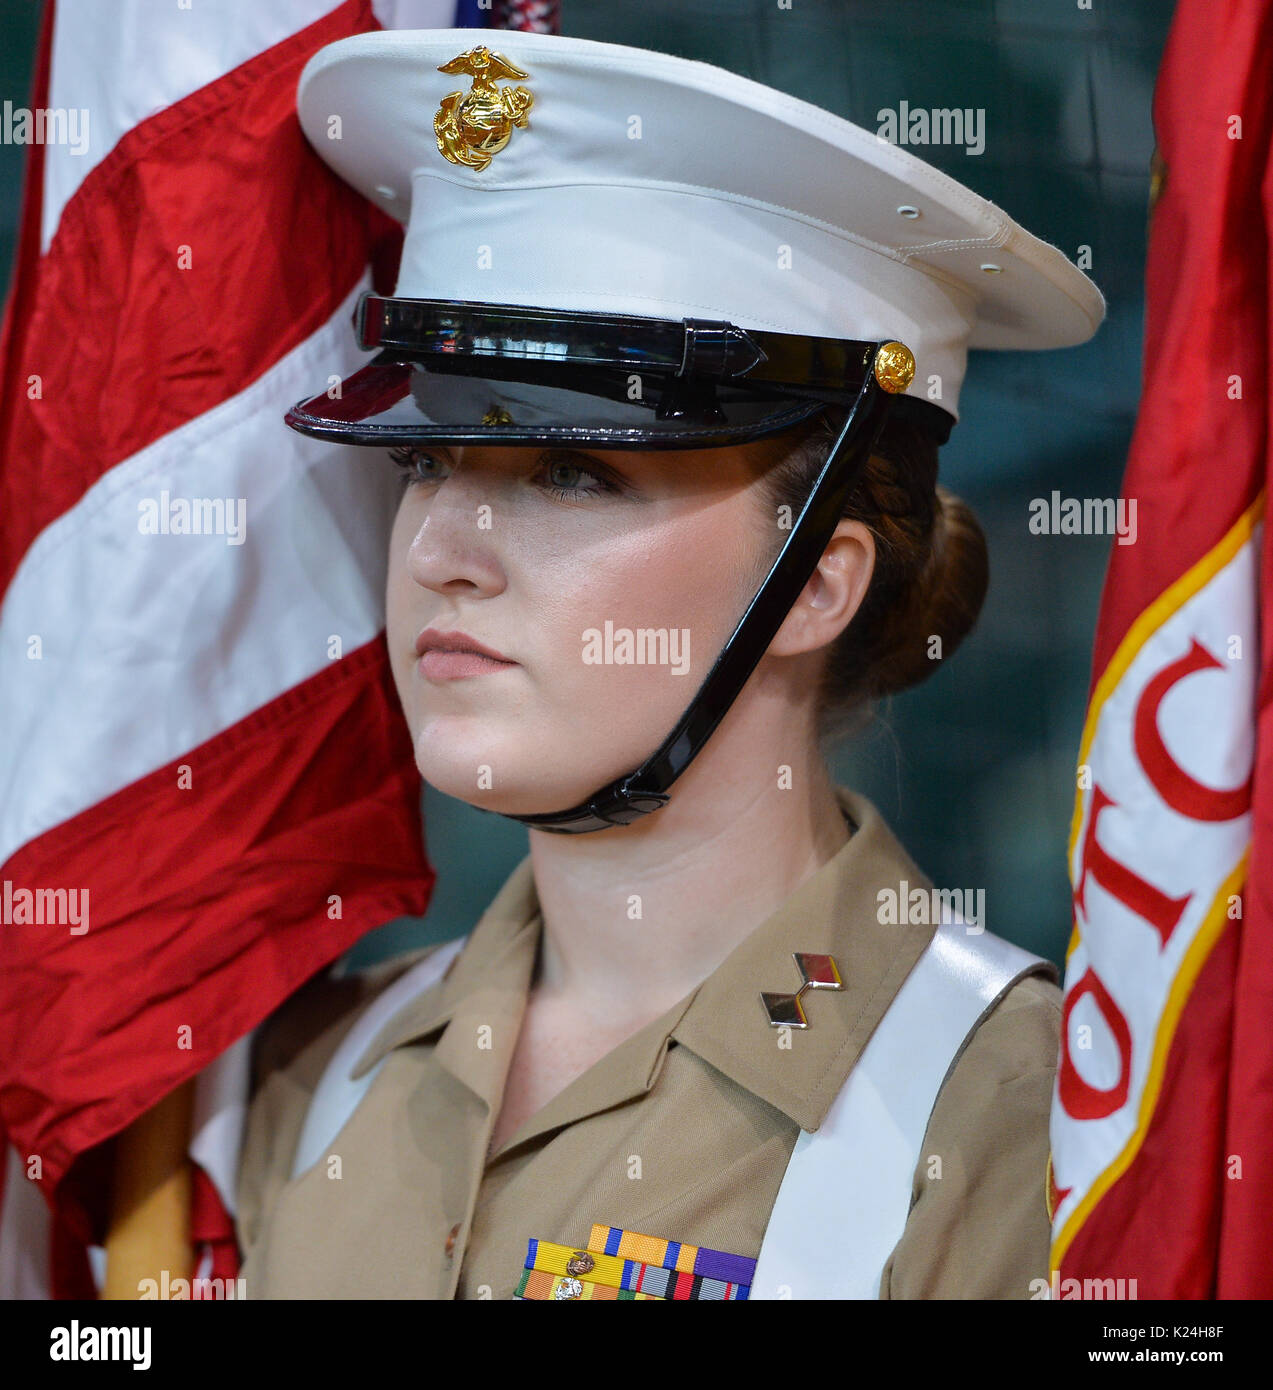 August 19, 2017: A Marine Corps color guard prepares to present colors before a Major League Baseball game between the Oakland Athletics and the Houston Astros at Minute Maid Park in Houston, TX. Chris Brown/CSM Stock Photo